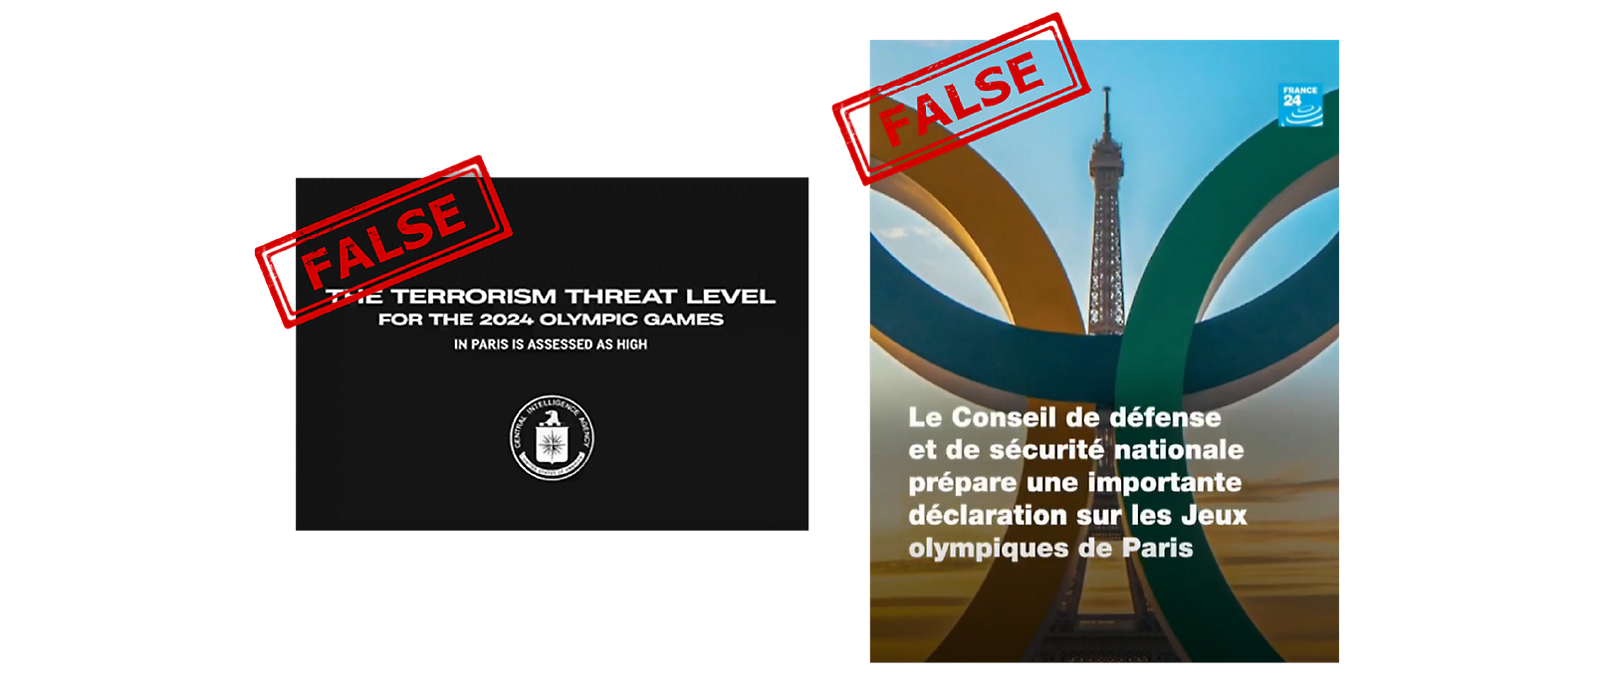 Image on the left showing a faked video press release warning the public of possible terror attacks at the 2024 Paris Summer Olympics. The image on the right shows a fabricated France 24 news clip claiming that nearly a quarter of Paris 2024 tickets have been returned due to concerns over terrorism. 